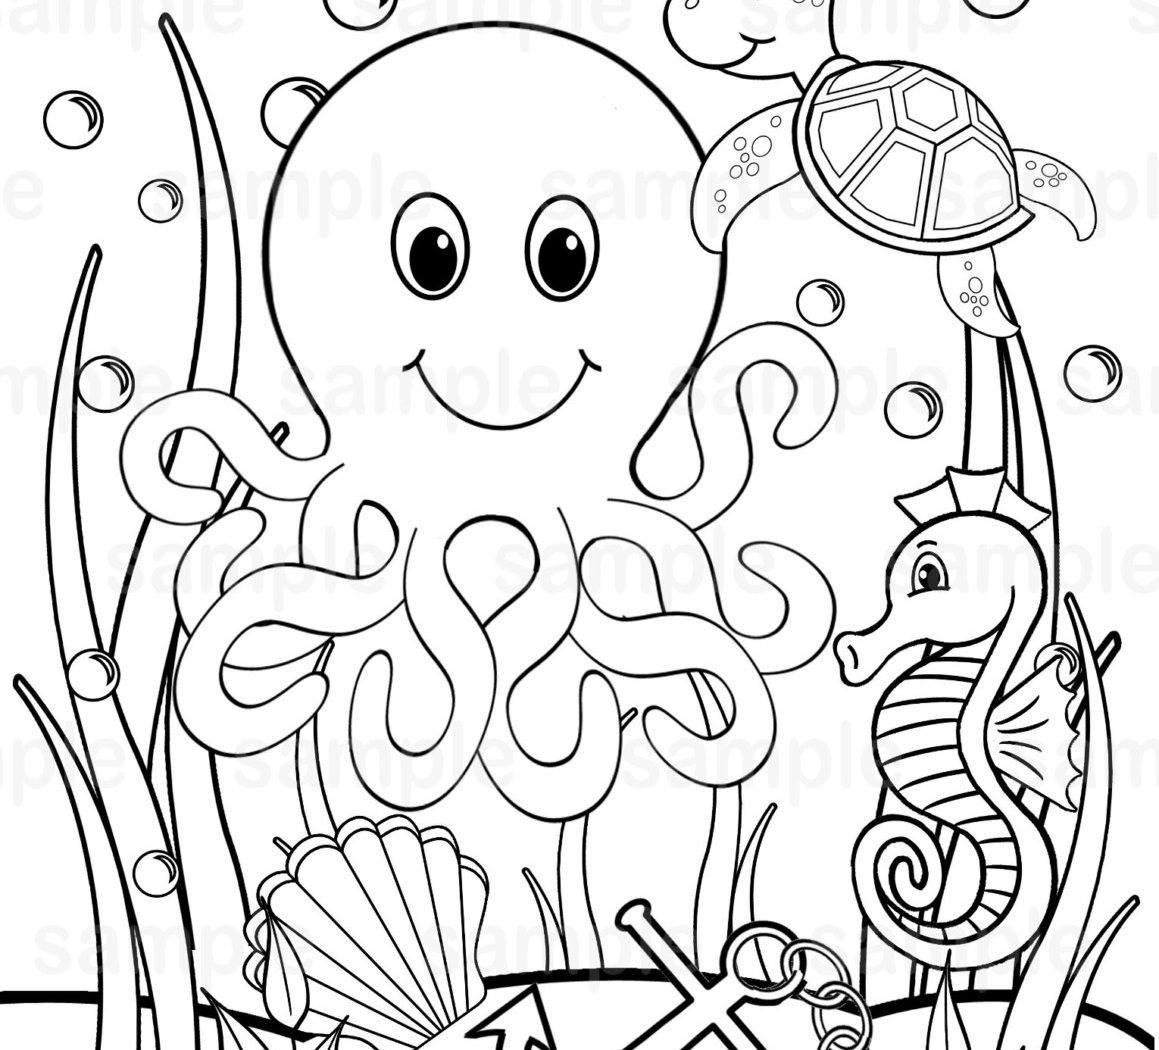 Under The Sea Coloring Pages For Toddlers / Under the Sea Coloring Page